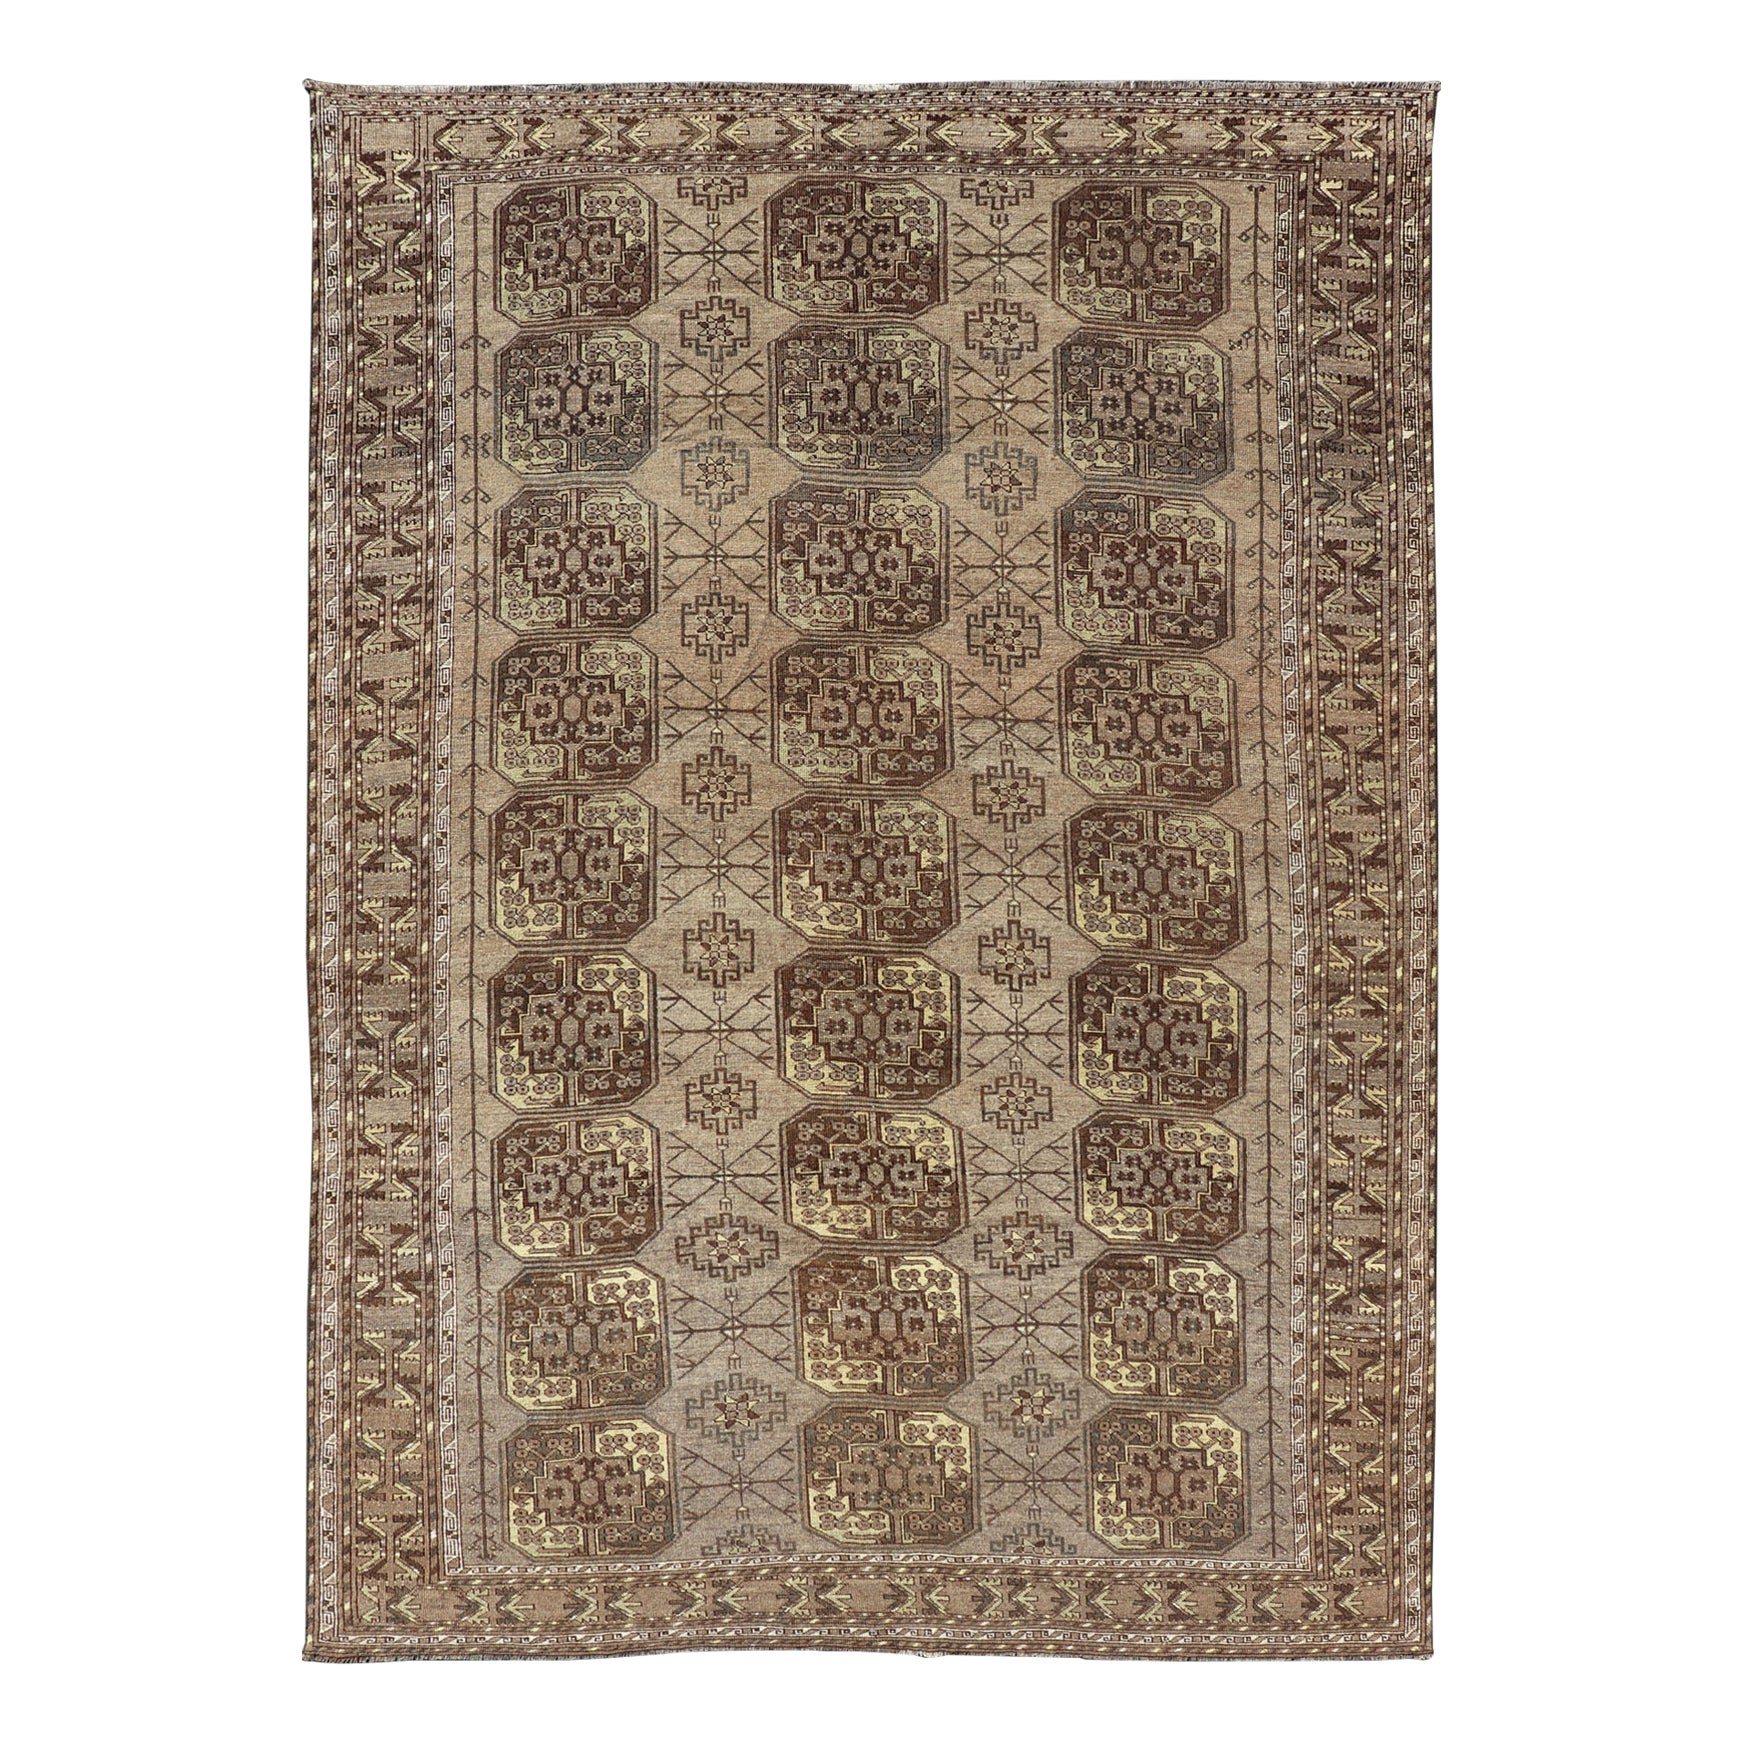 Hand-Knotted Turkomen Ersari Rug in Wool with Repeating Sub-Geometric Gul Design For Sale